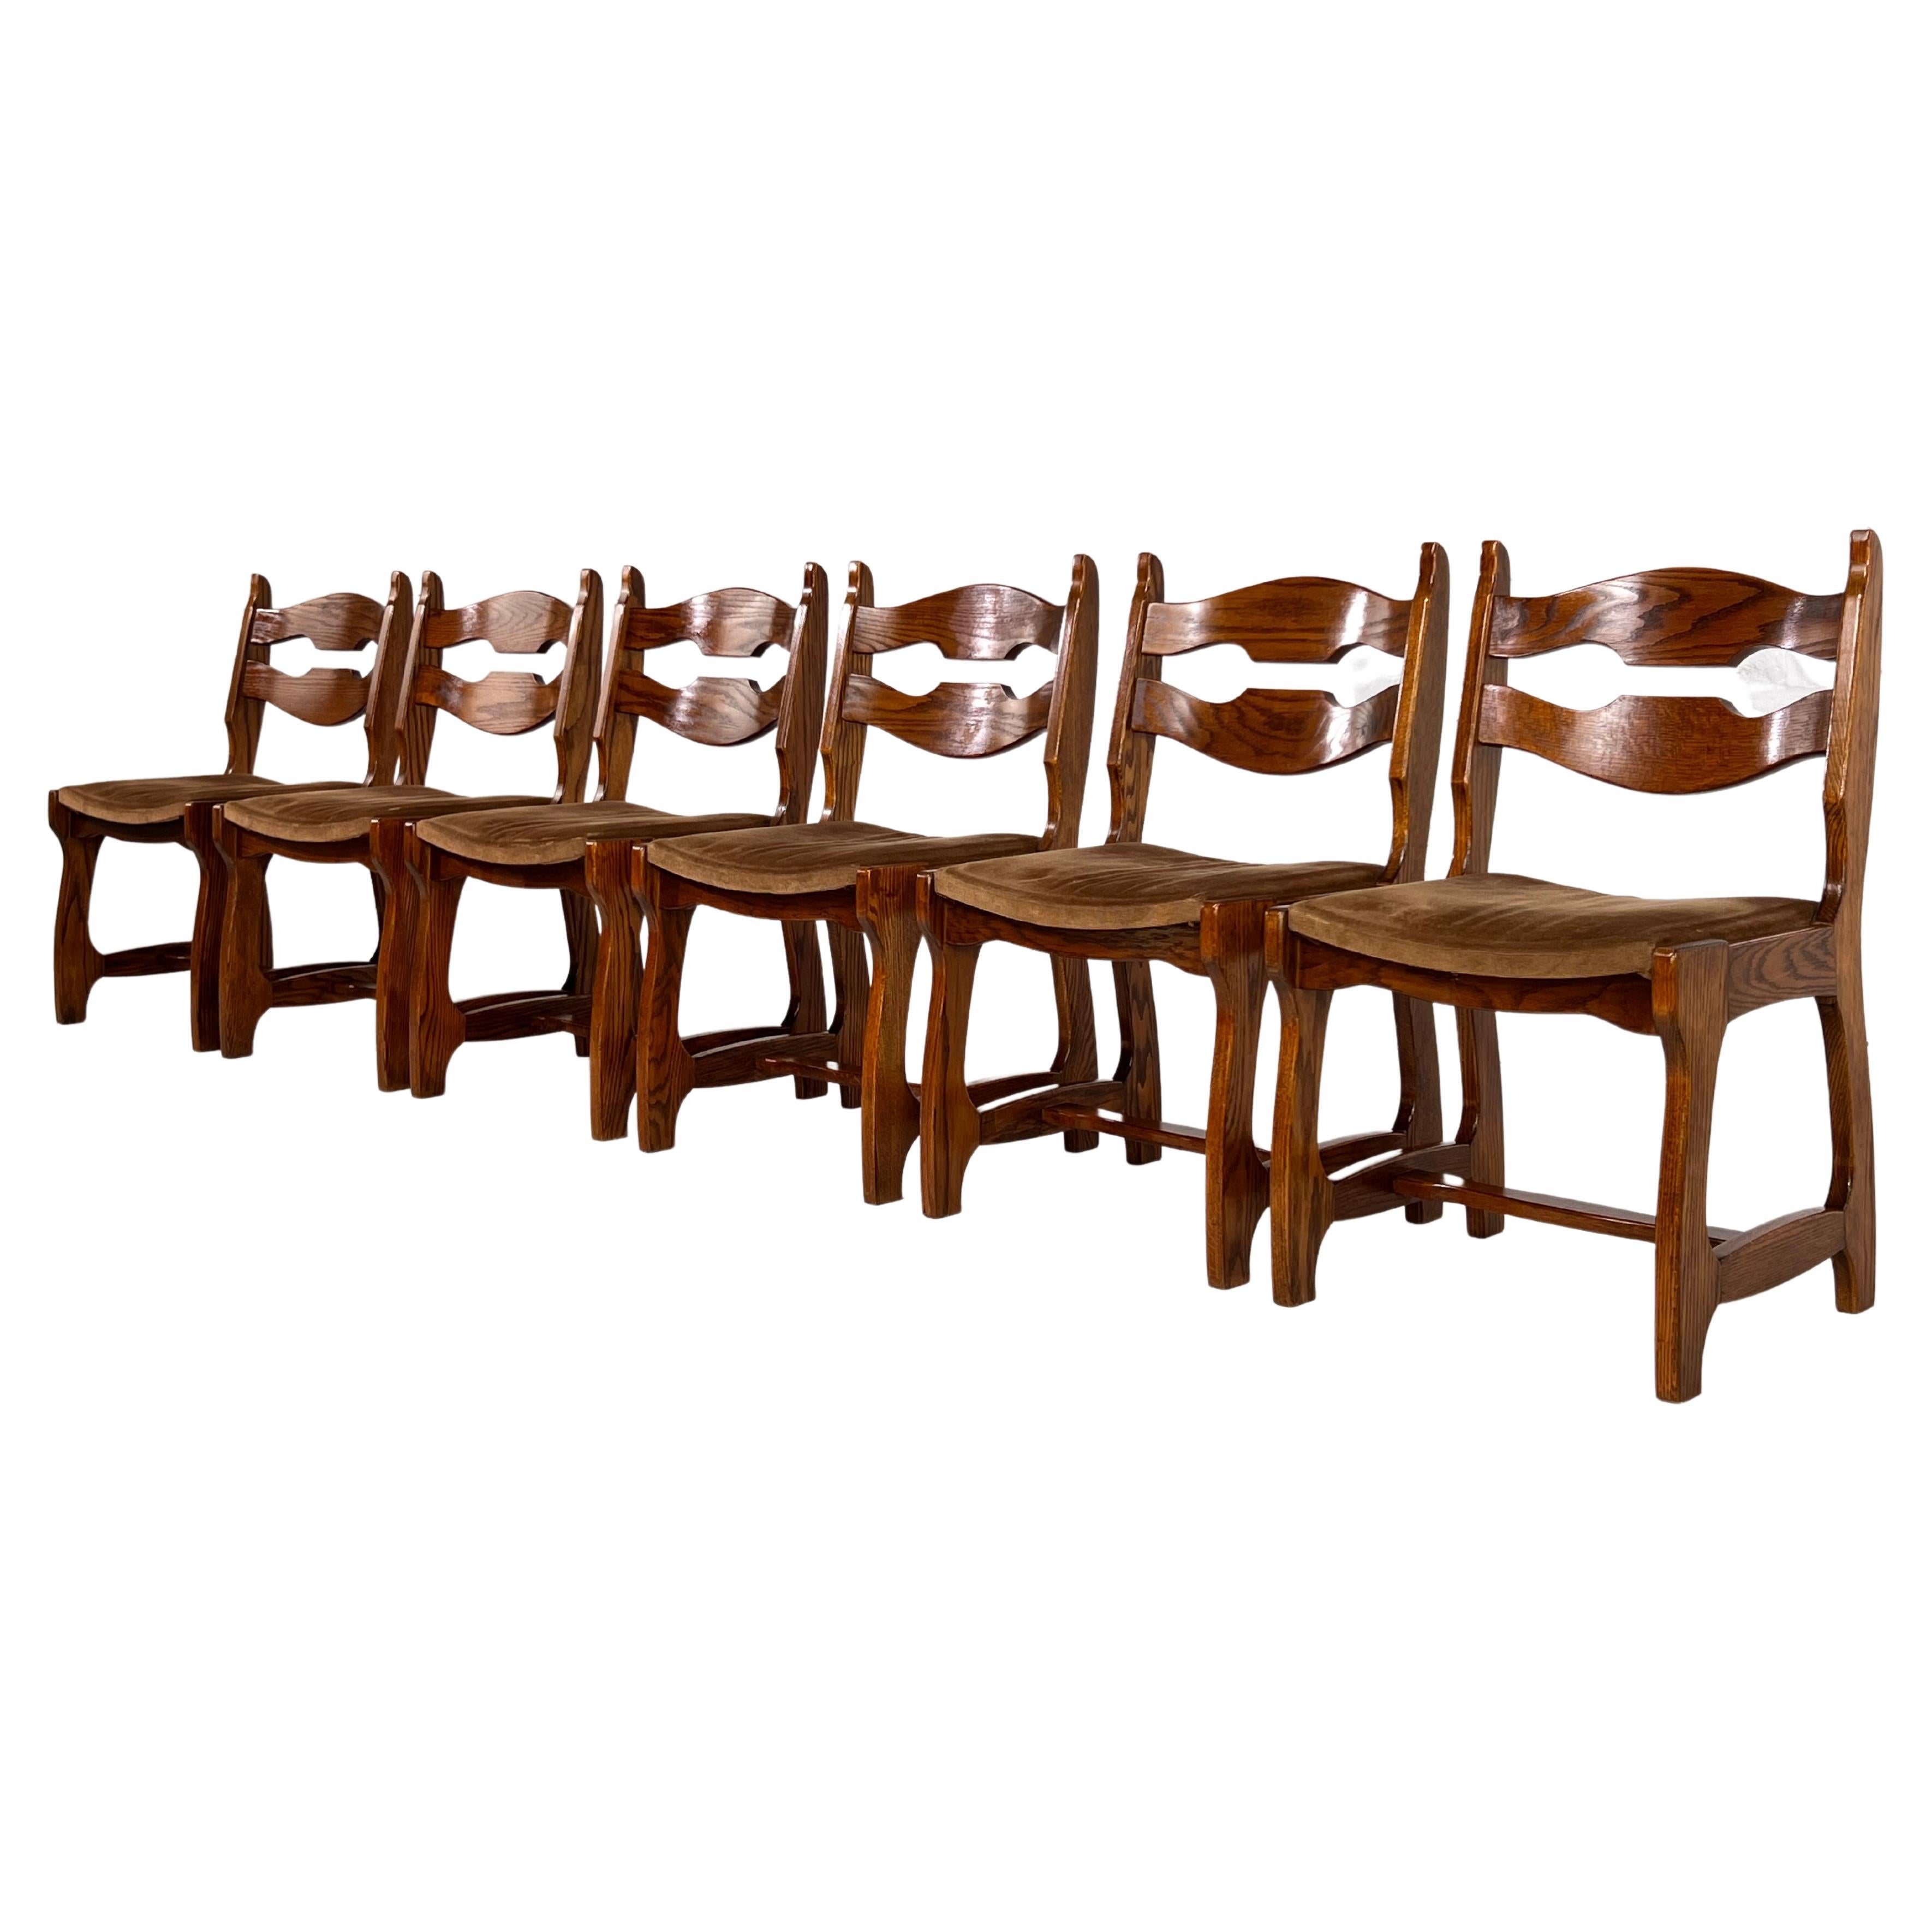 1950s Design Oak Wooden And Velvet Seat Set of 6 Chairs For Sale